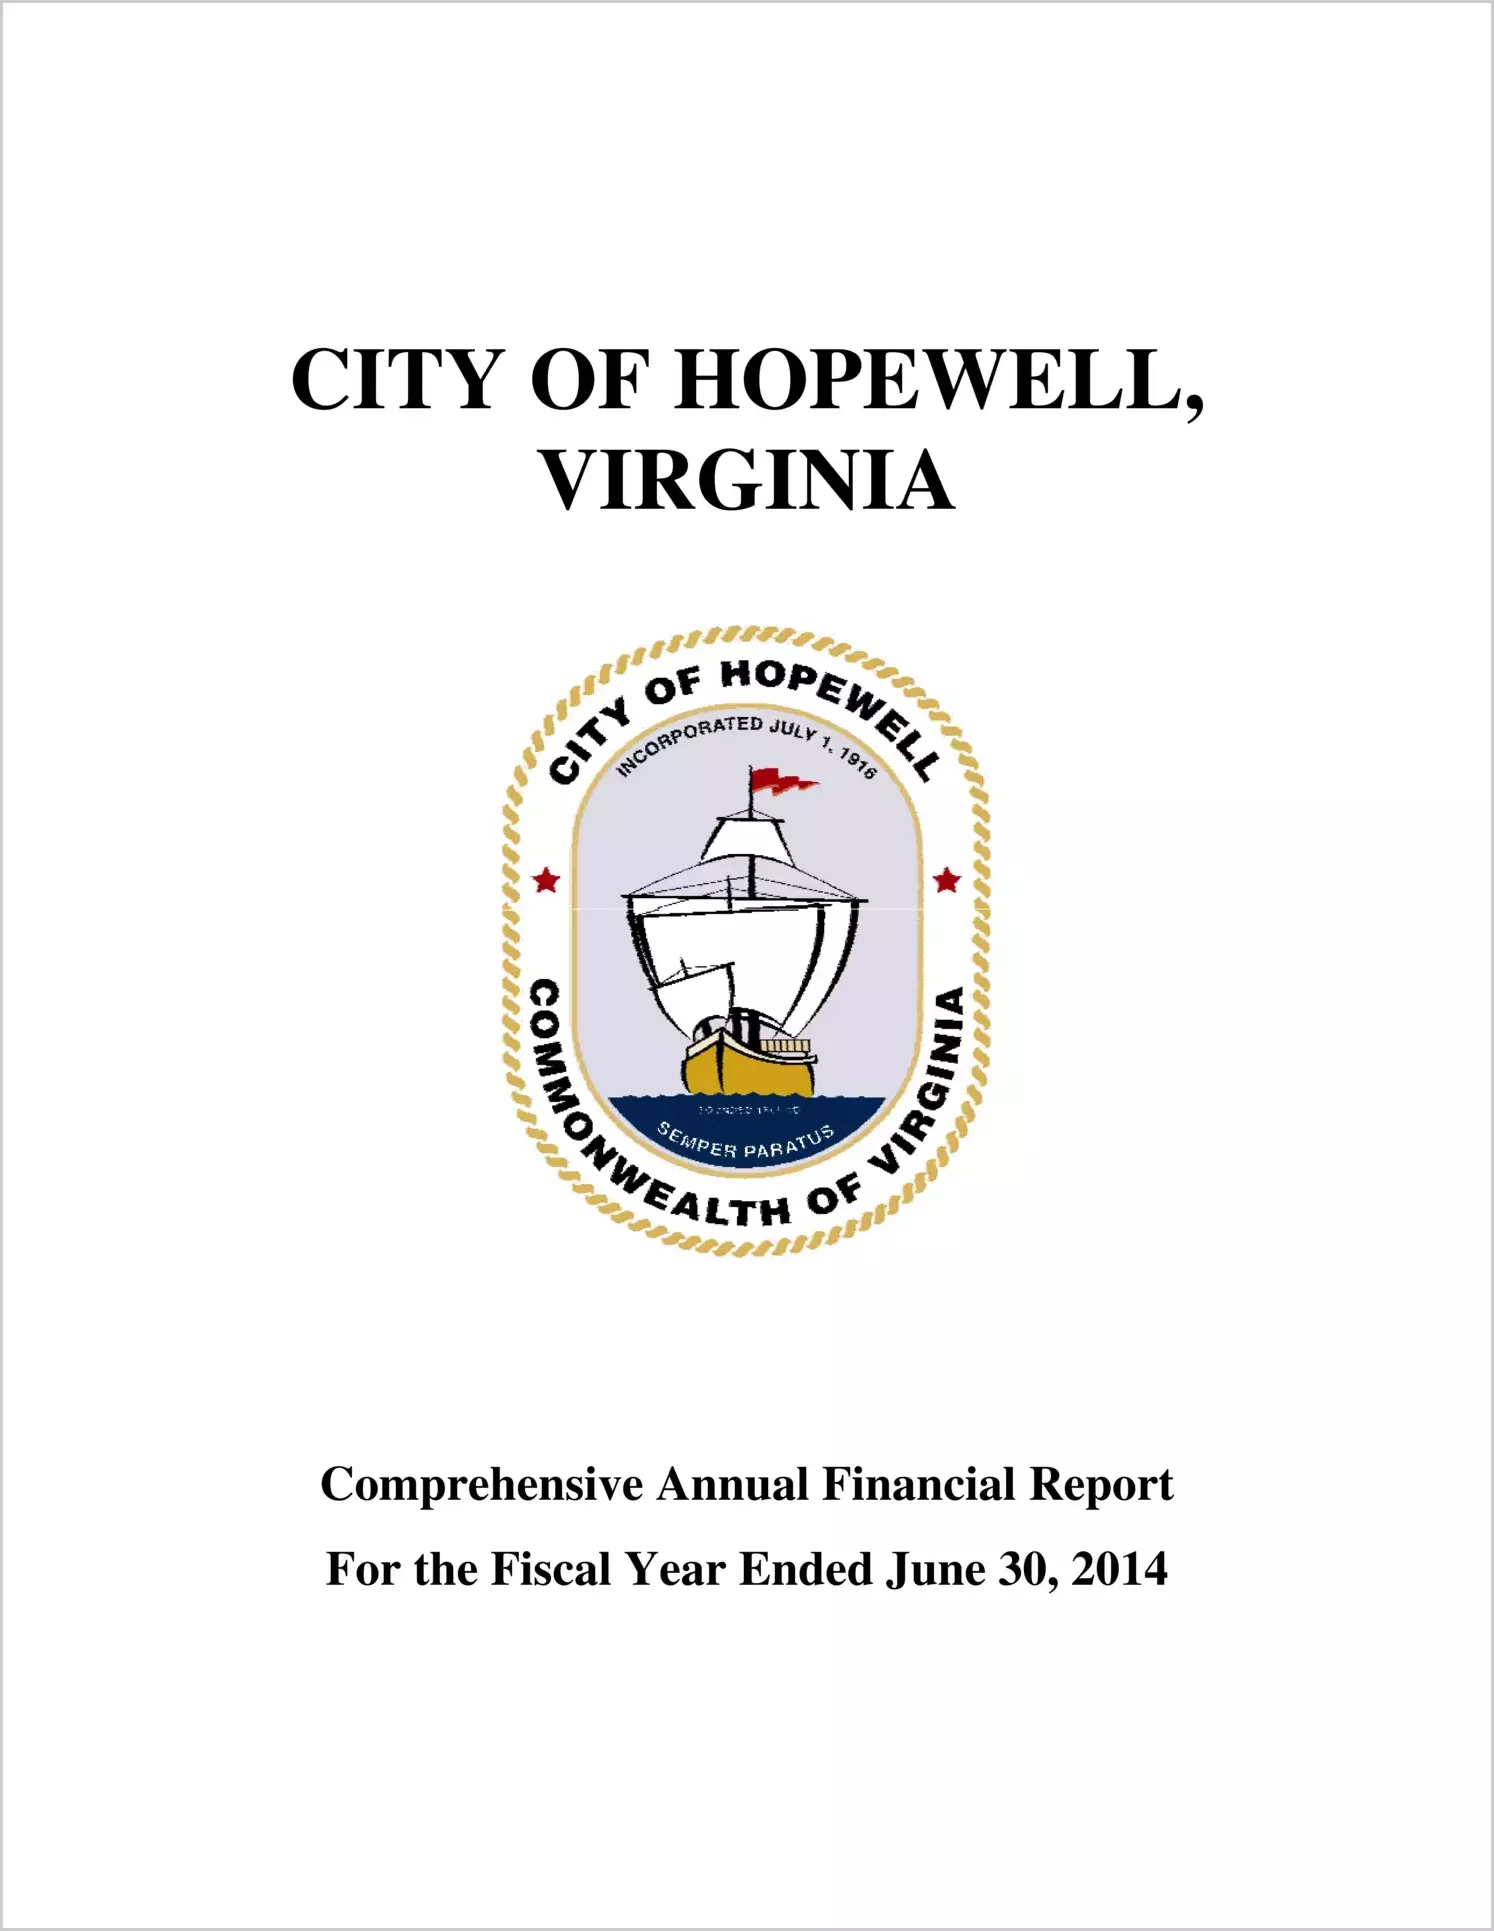 2014 Annual Financial Report for City of Hopewell